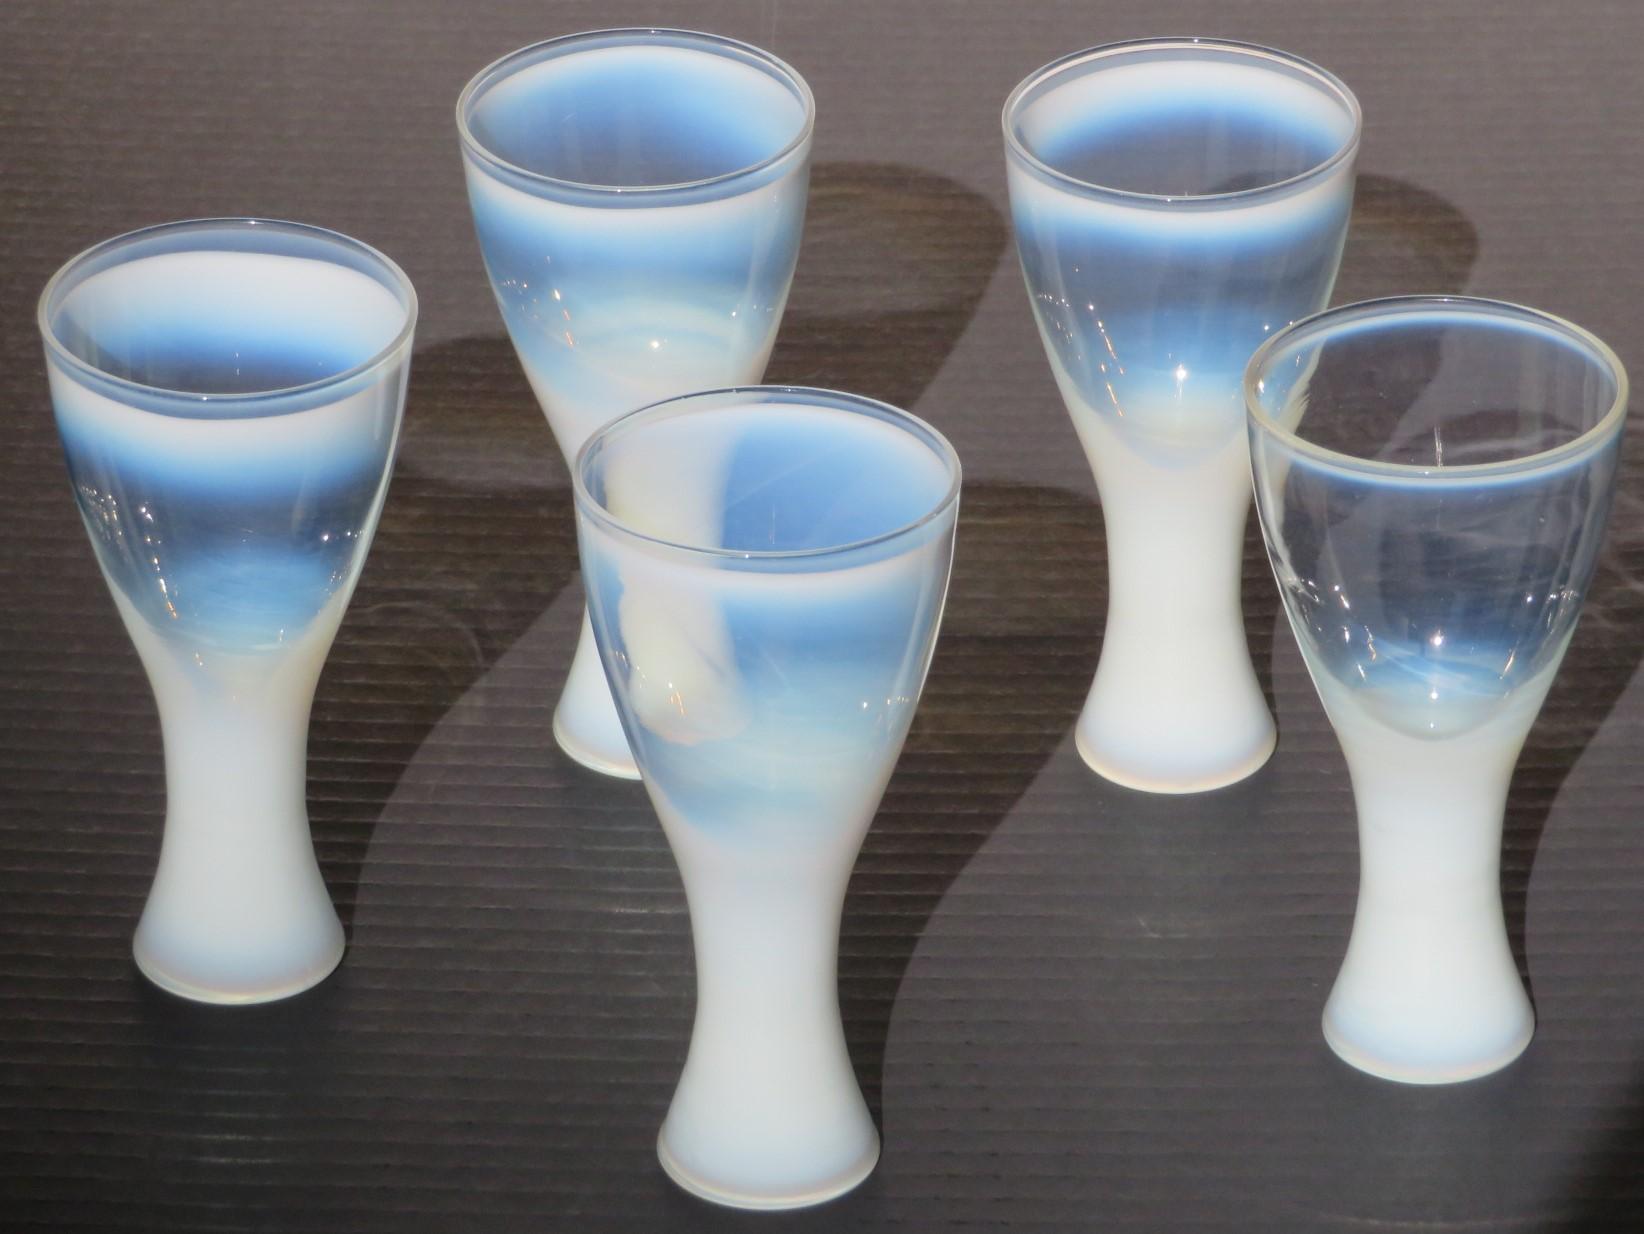 Japanese Theme Formal Line Footed Glasses Designed by Russel Wright for Yamato China 60's